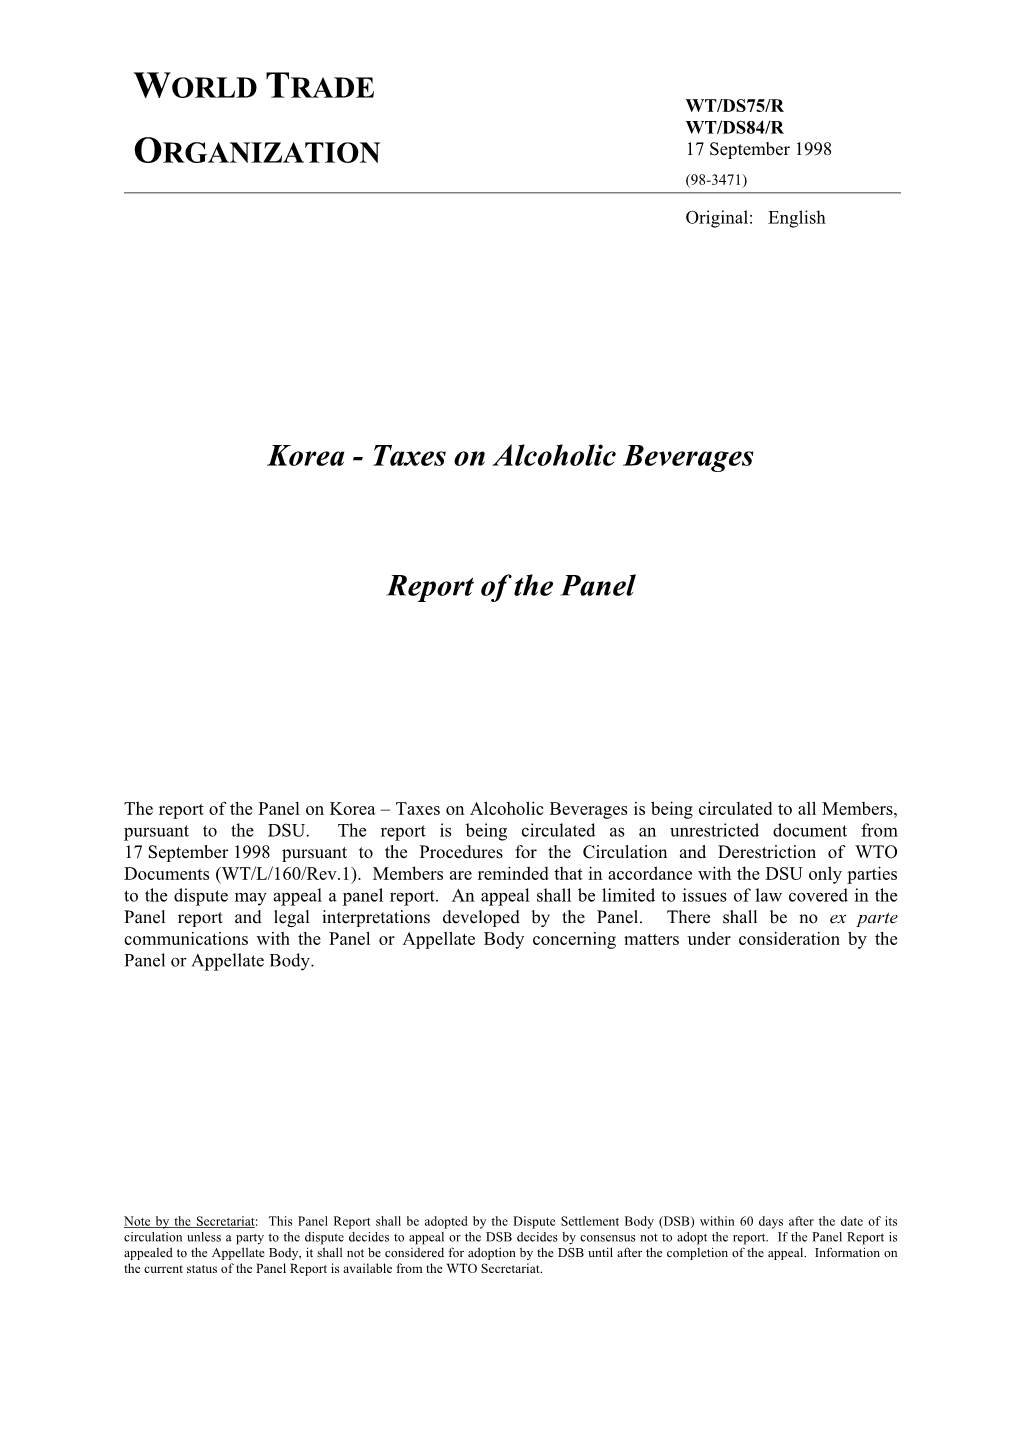 Taxes on Alcoholic Beverages Report of the Panel